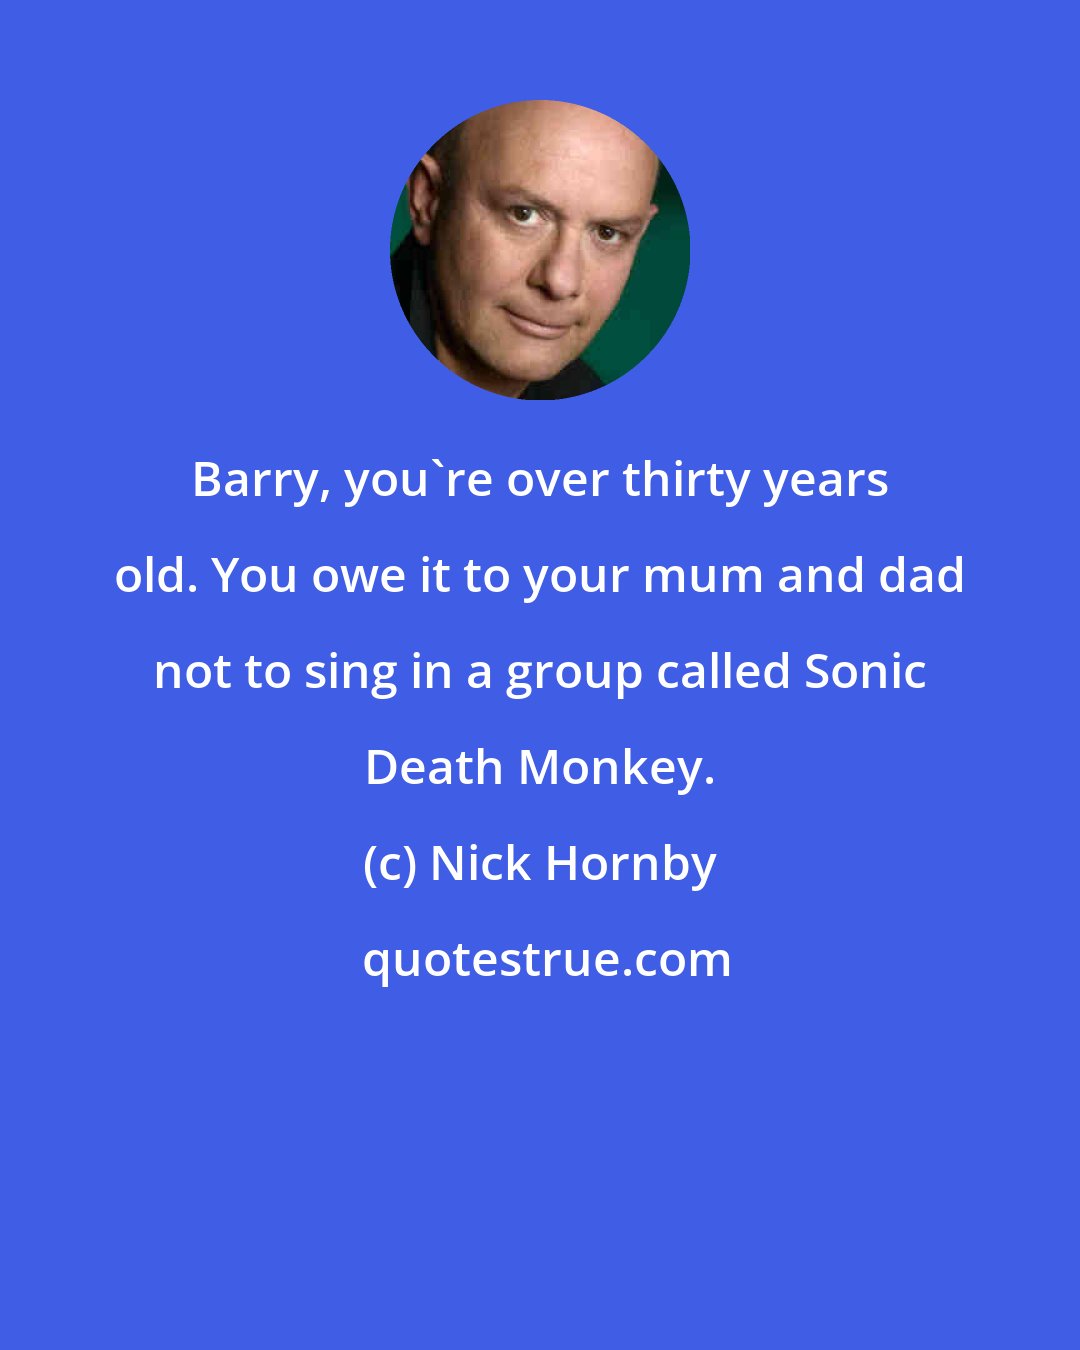 Nick Hornby: Barry, you're over thirty years old. You owe it to your mum and dad not to sing in a group called Sonic Death Monkey.